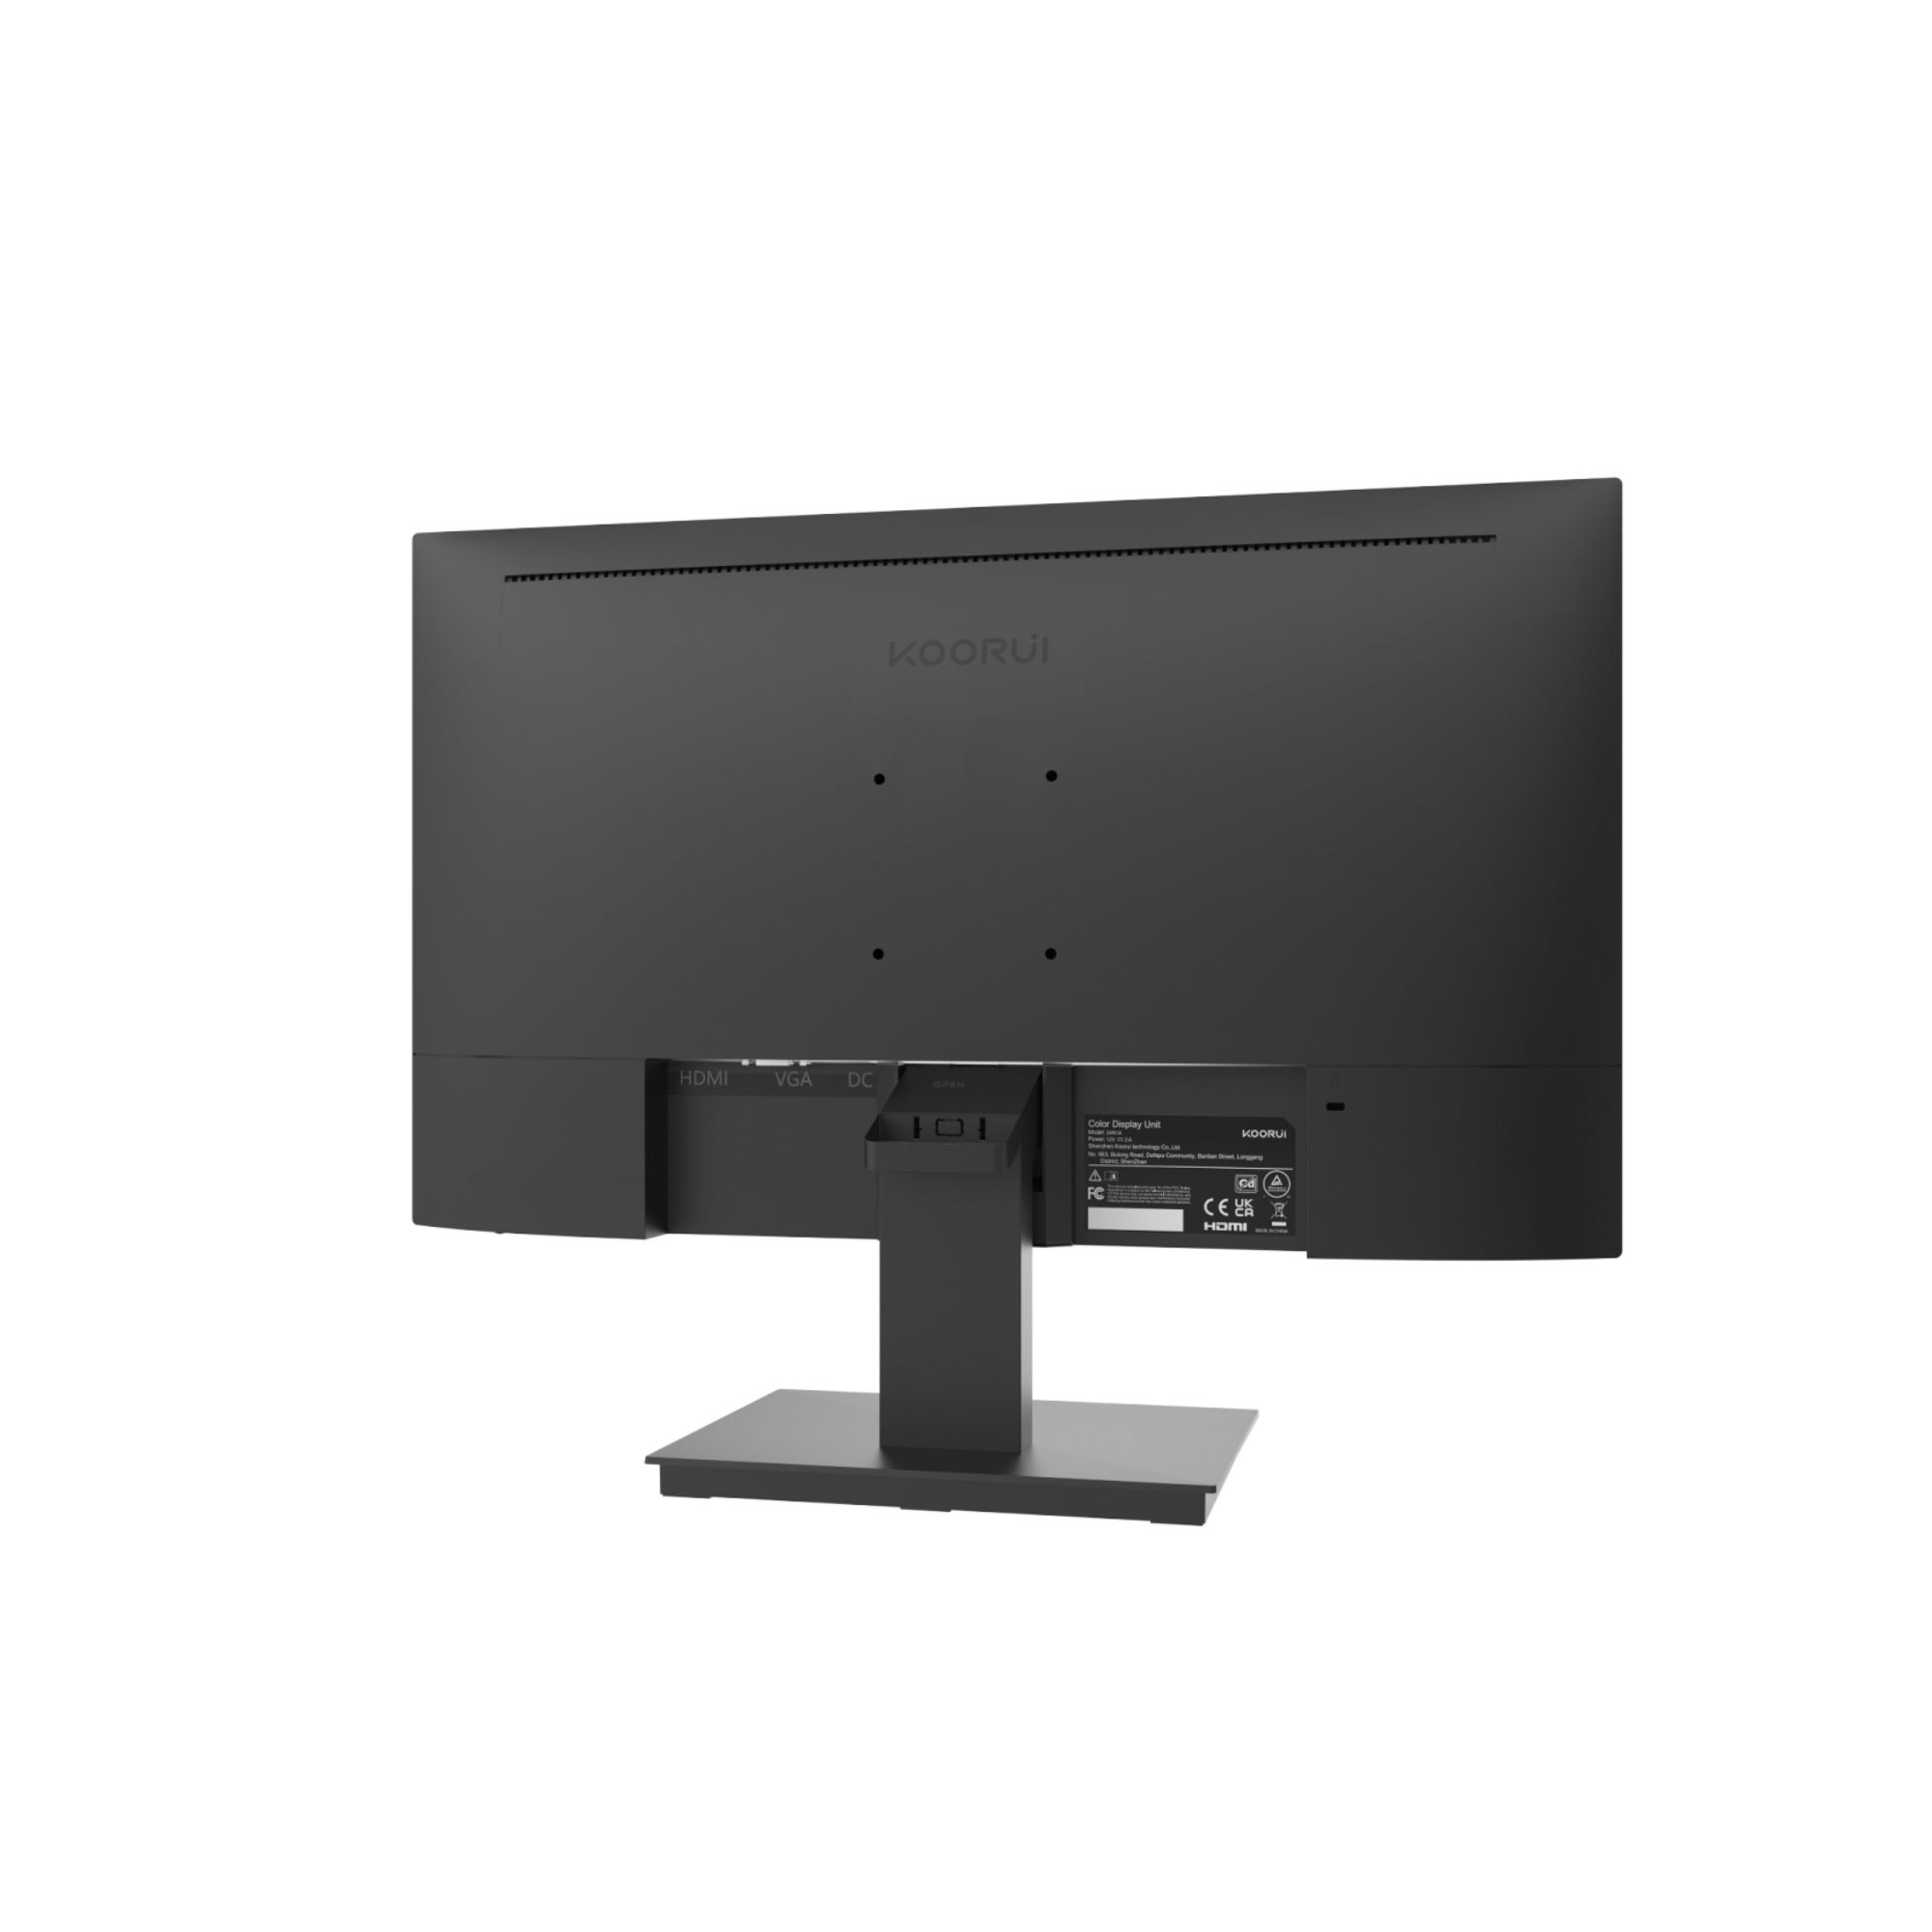 KOORUI ‎22N1 monitor 22 LED Full HD • Unboxing, installation and settings  overview 